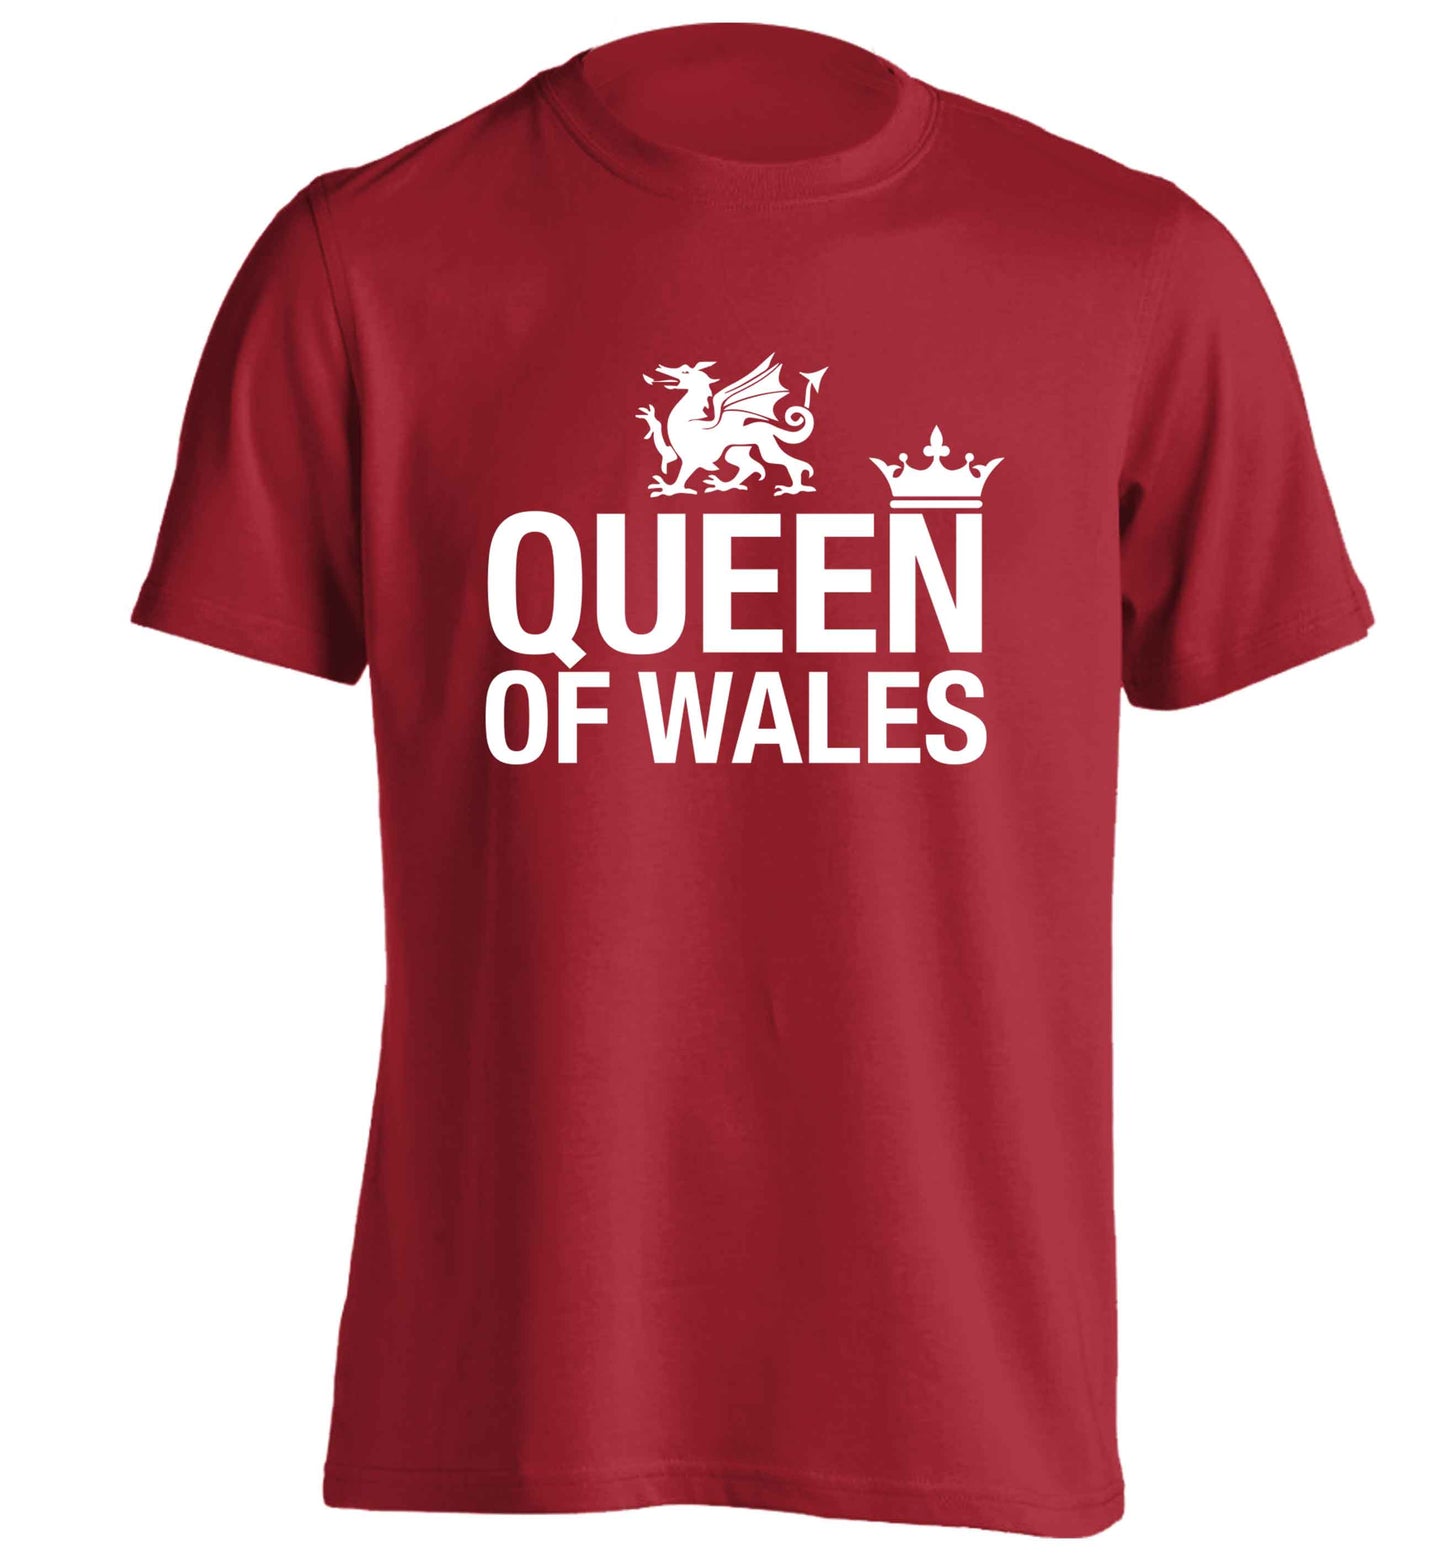 Queen of Wales adults unisex red Tshirt 2XL